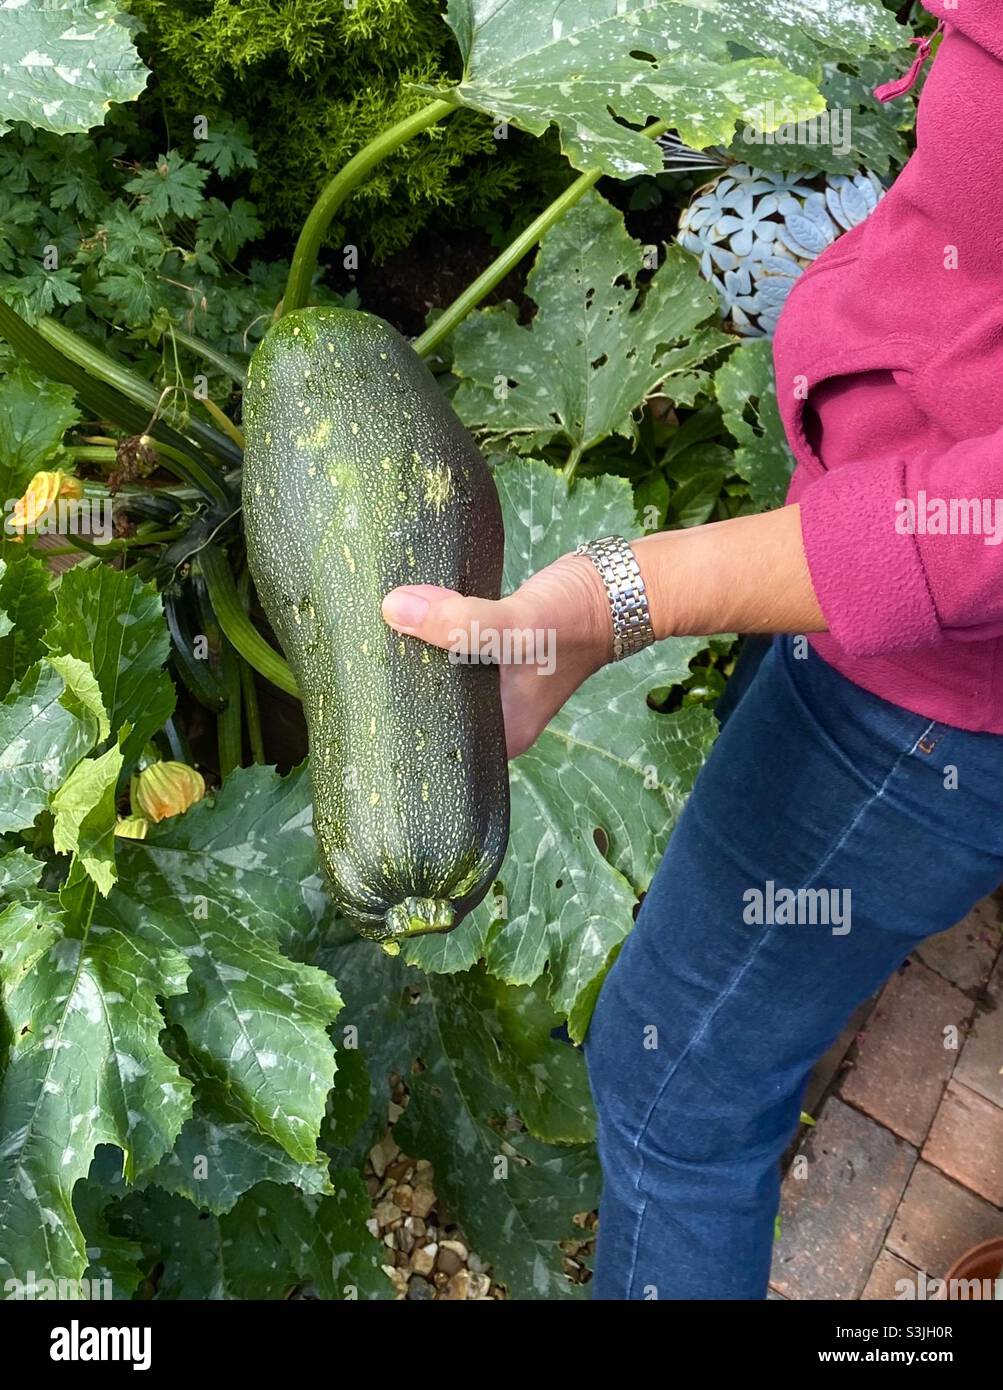 Large organically grown courgette growing in the garden Stock Photo